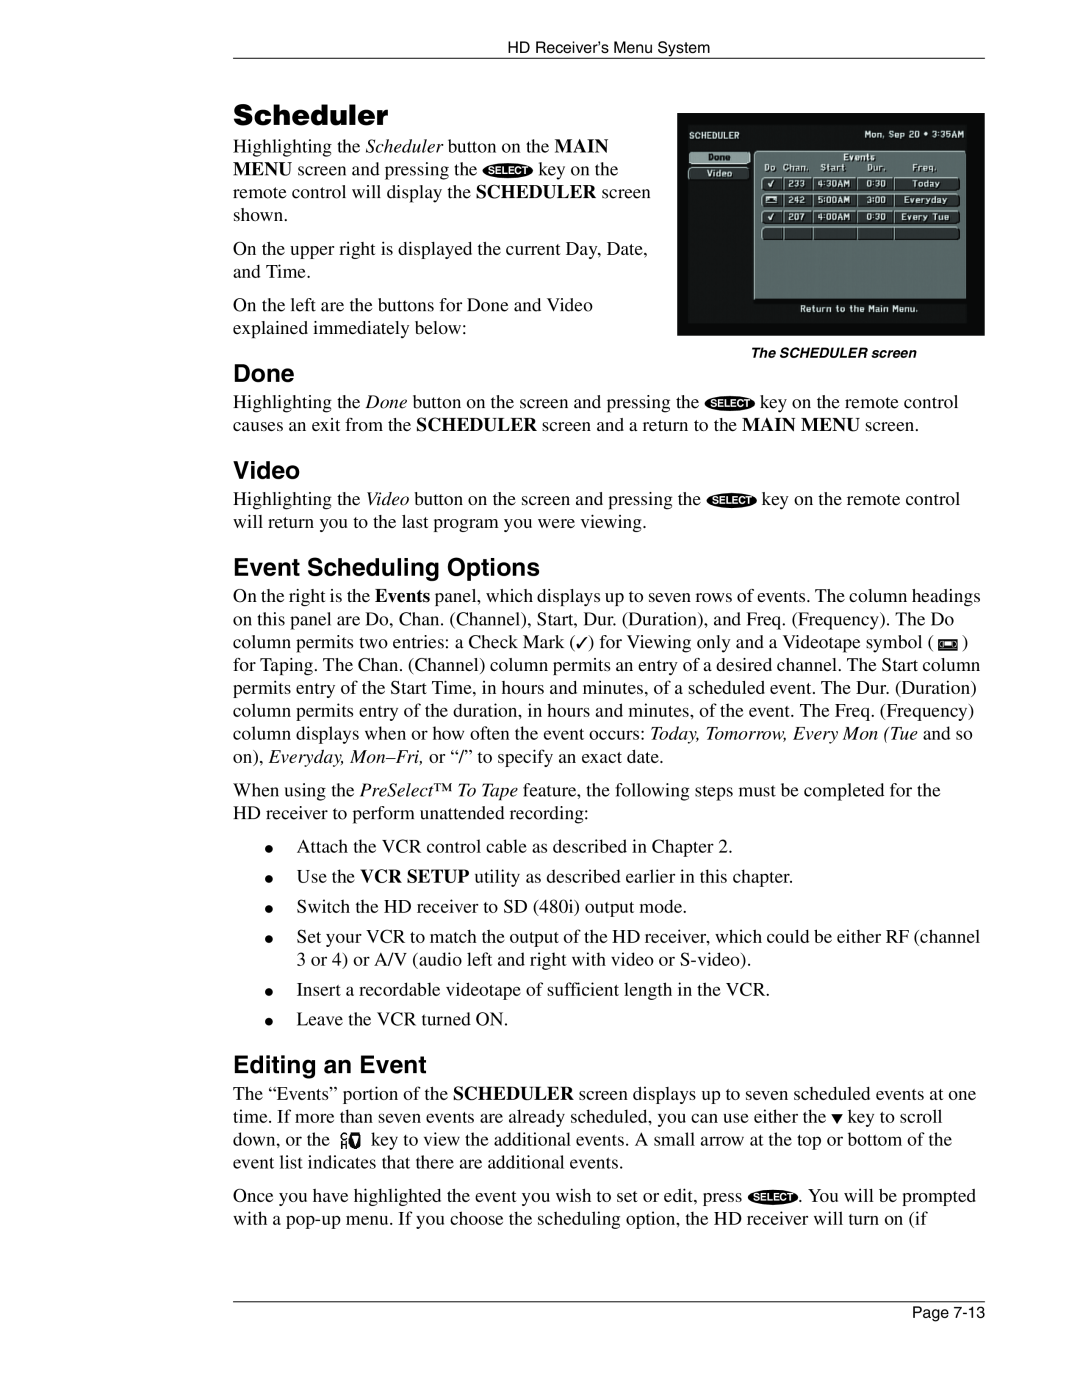 DirecTV HIRD-E86 manual Scheduler, Event Scheduling Options, Editing an Event, Done, Video 